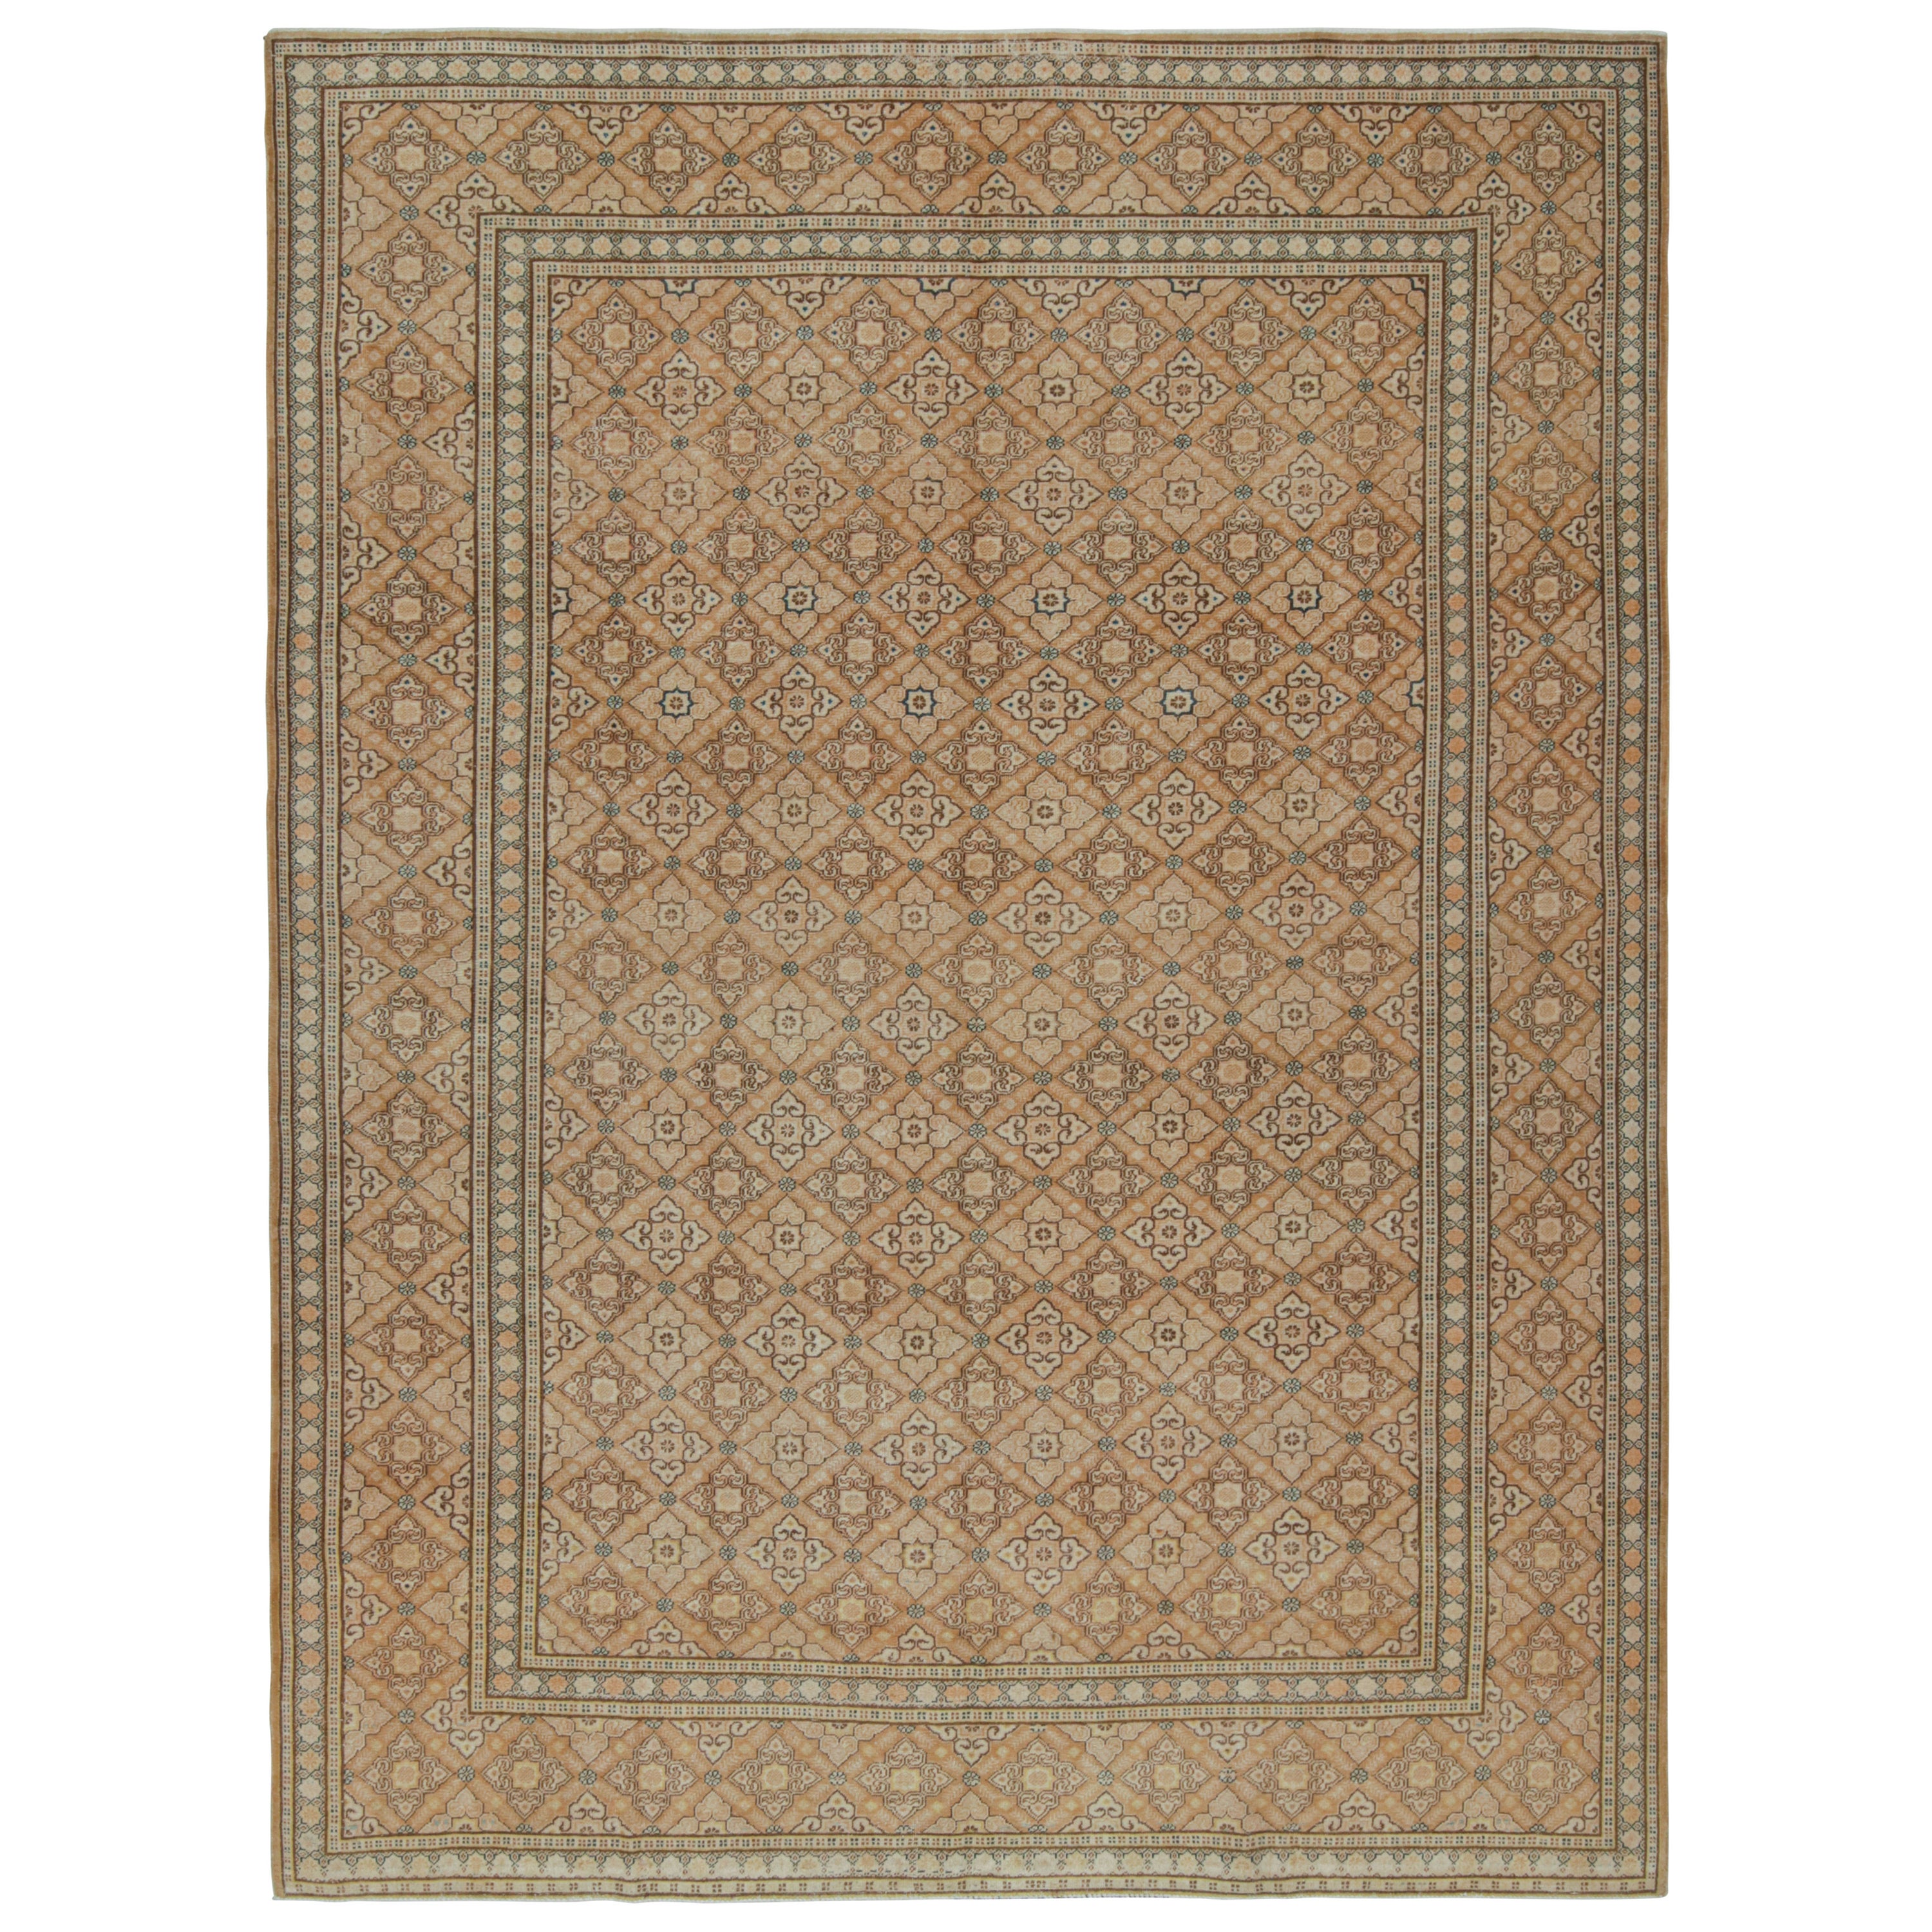 Vintage Persian Tabriz Rug in Brown, with Floral Patterns, from Rug & Kilim For Sale